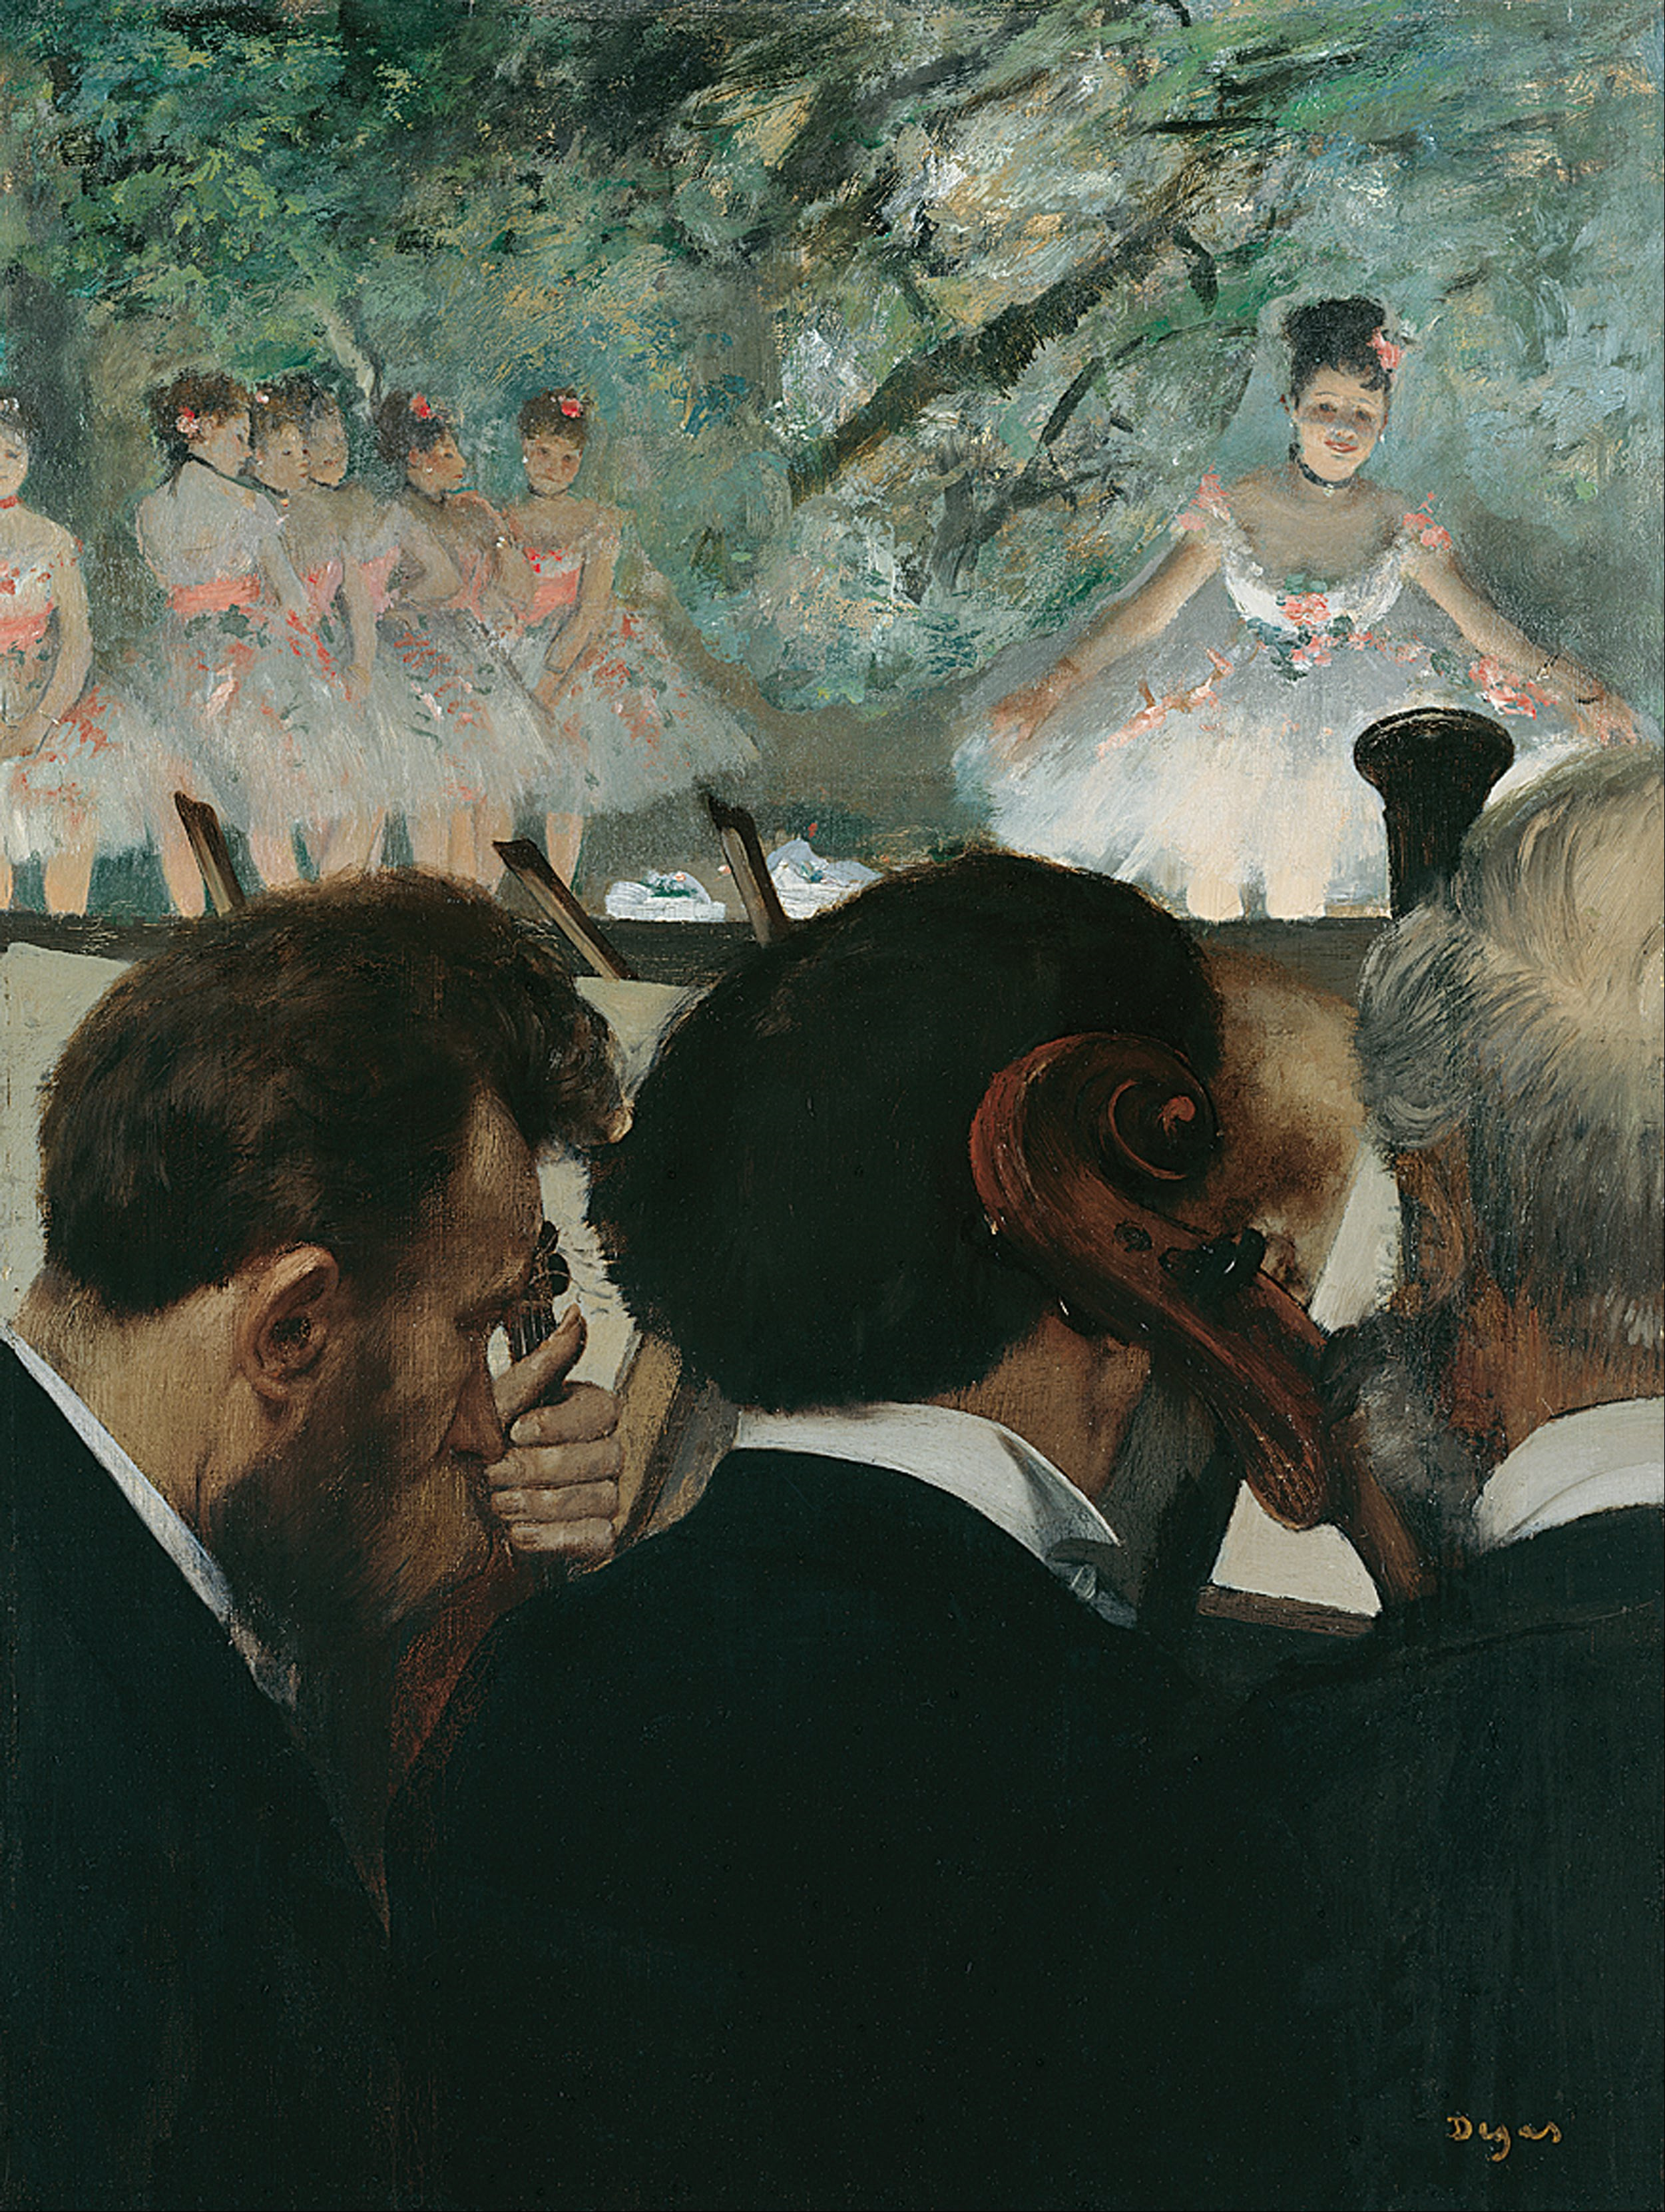 Musicians in the Orchestra by Edgar Degas - 1872 - 49 x 69 cm Städel Museum